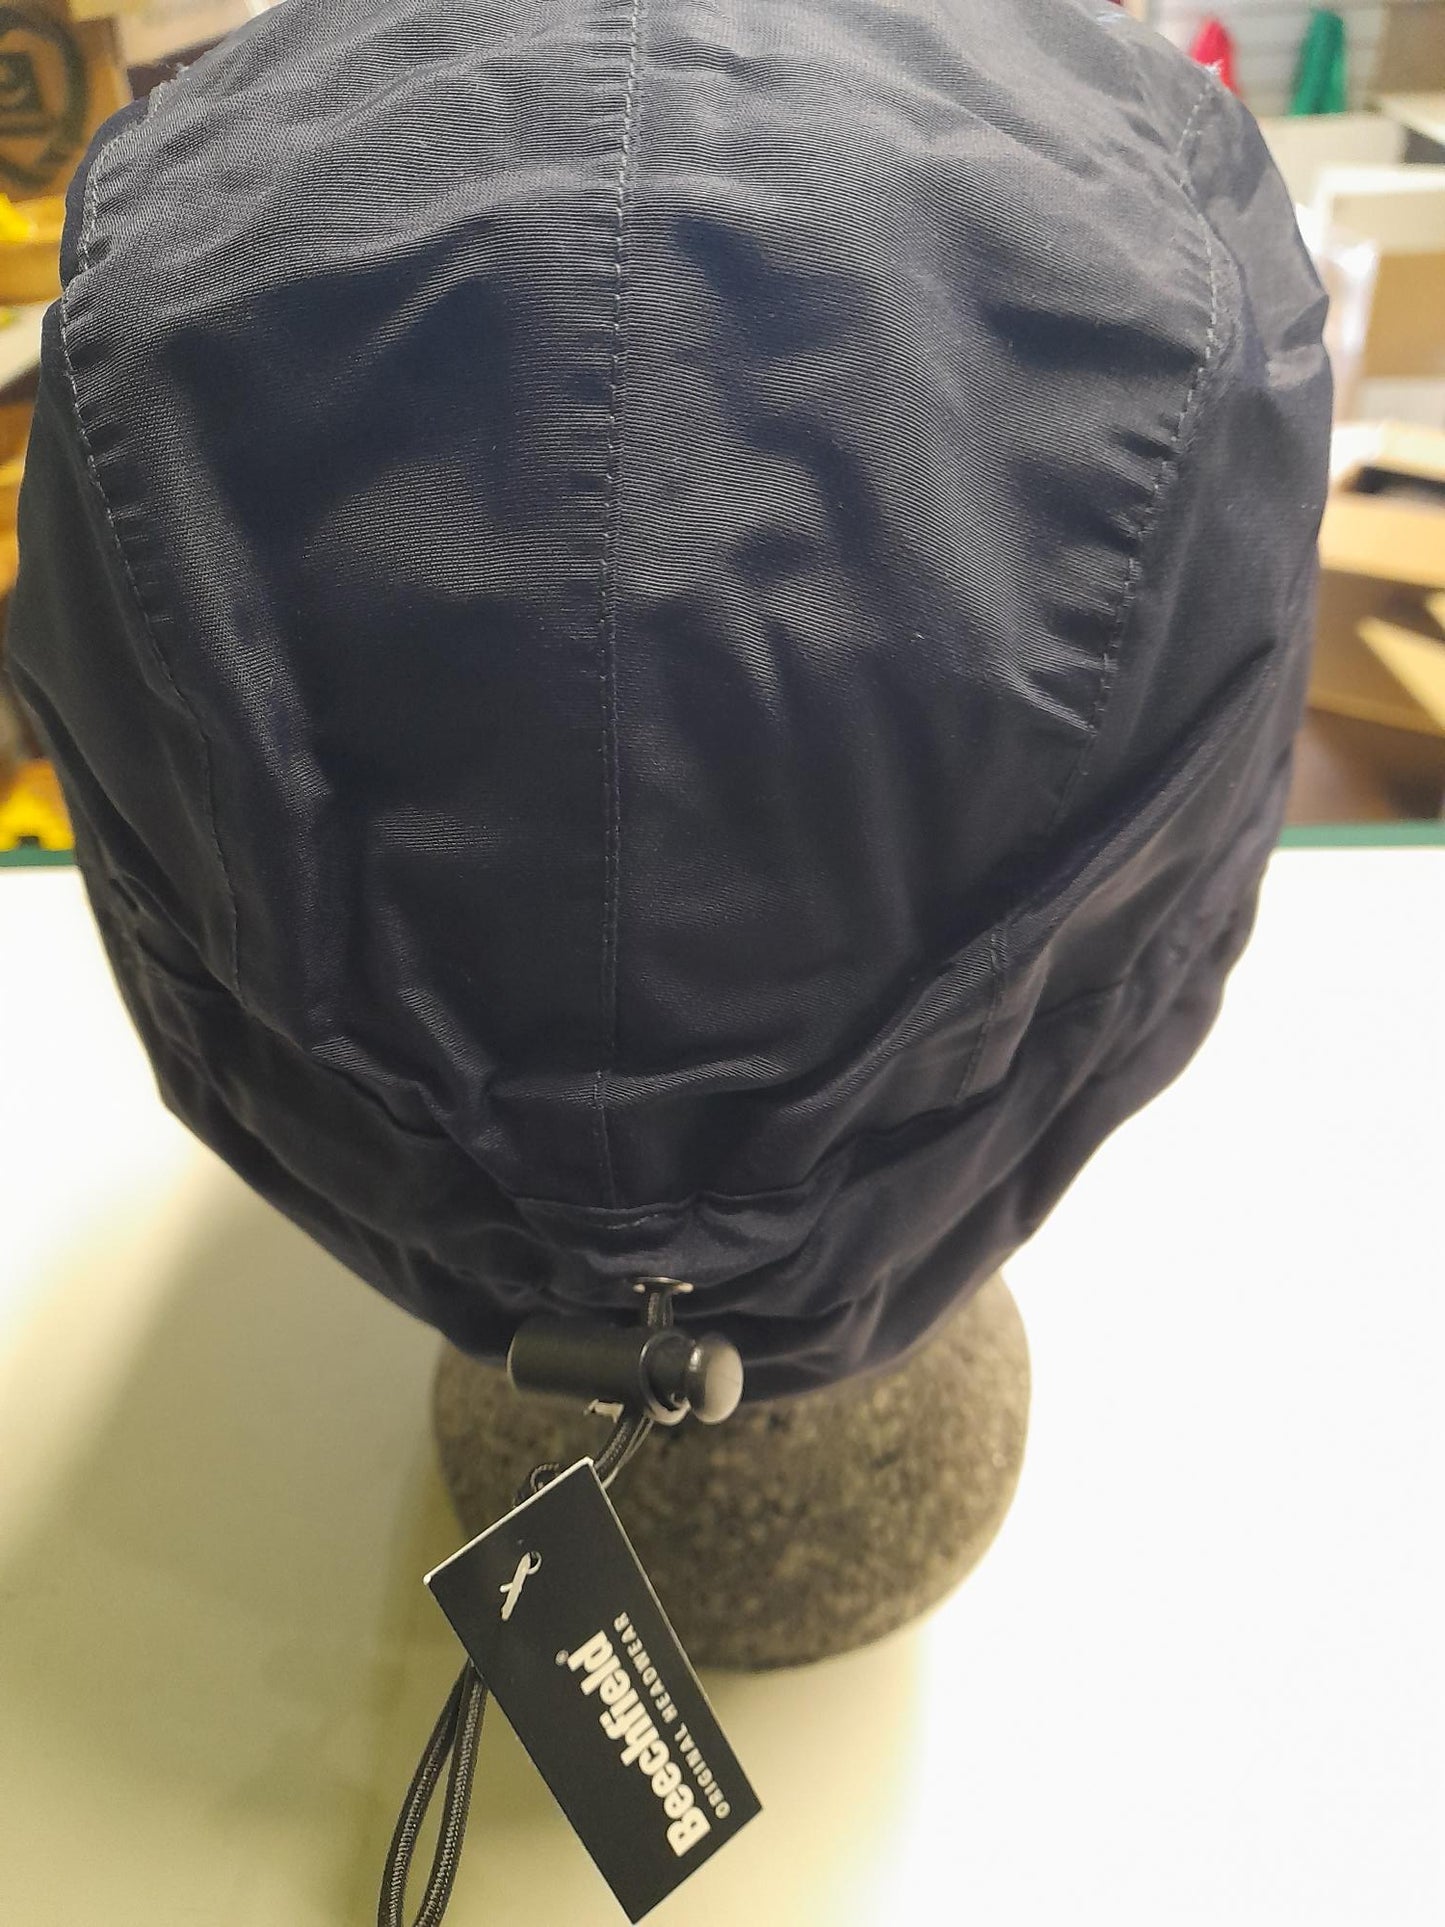 NWWT fleece lined mountain cap, with earflaps